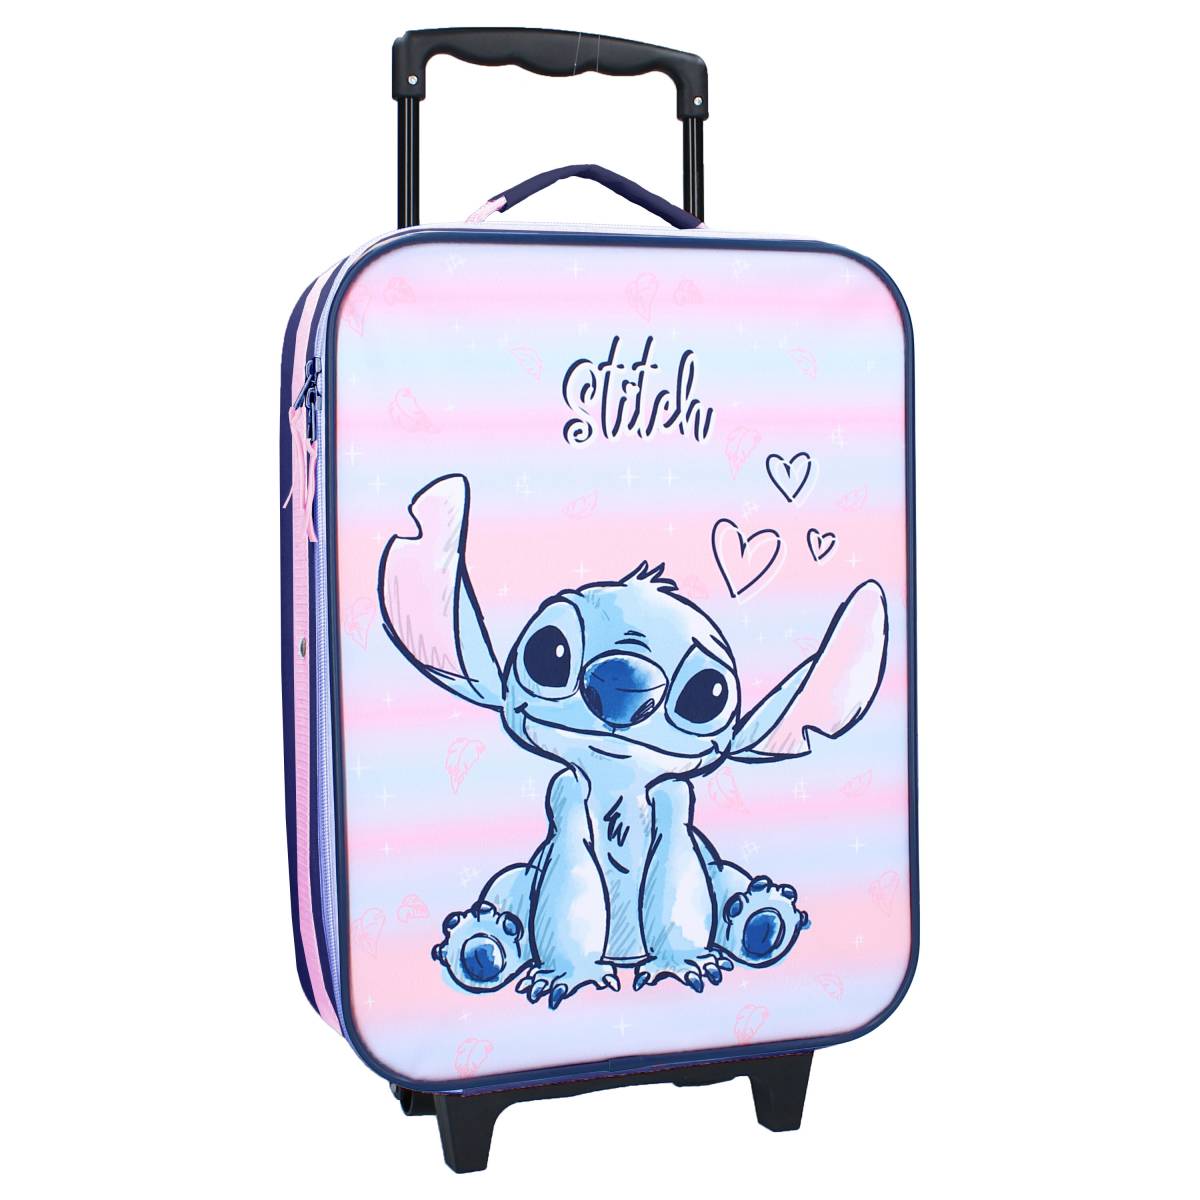 Trolley suitcase Stitch Made to Roll